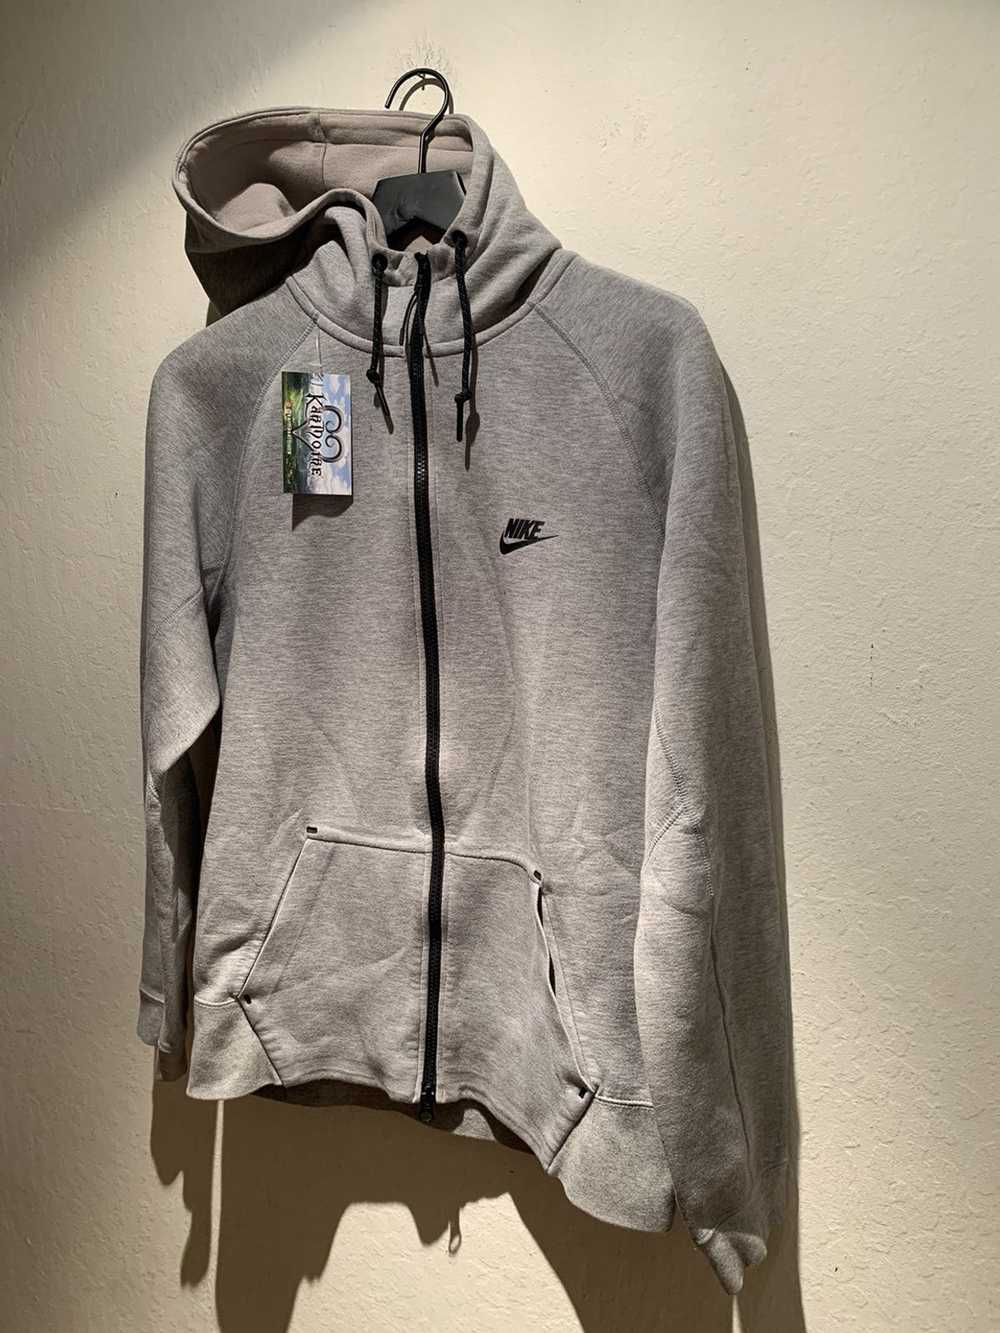 TECH FLEECE JESUS on X: If this is true…….. dawg that's horrible